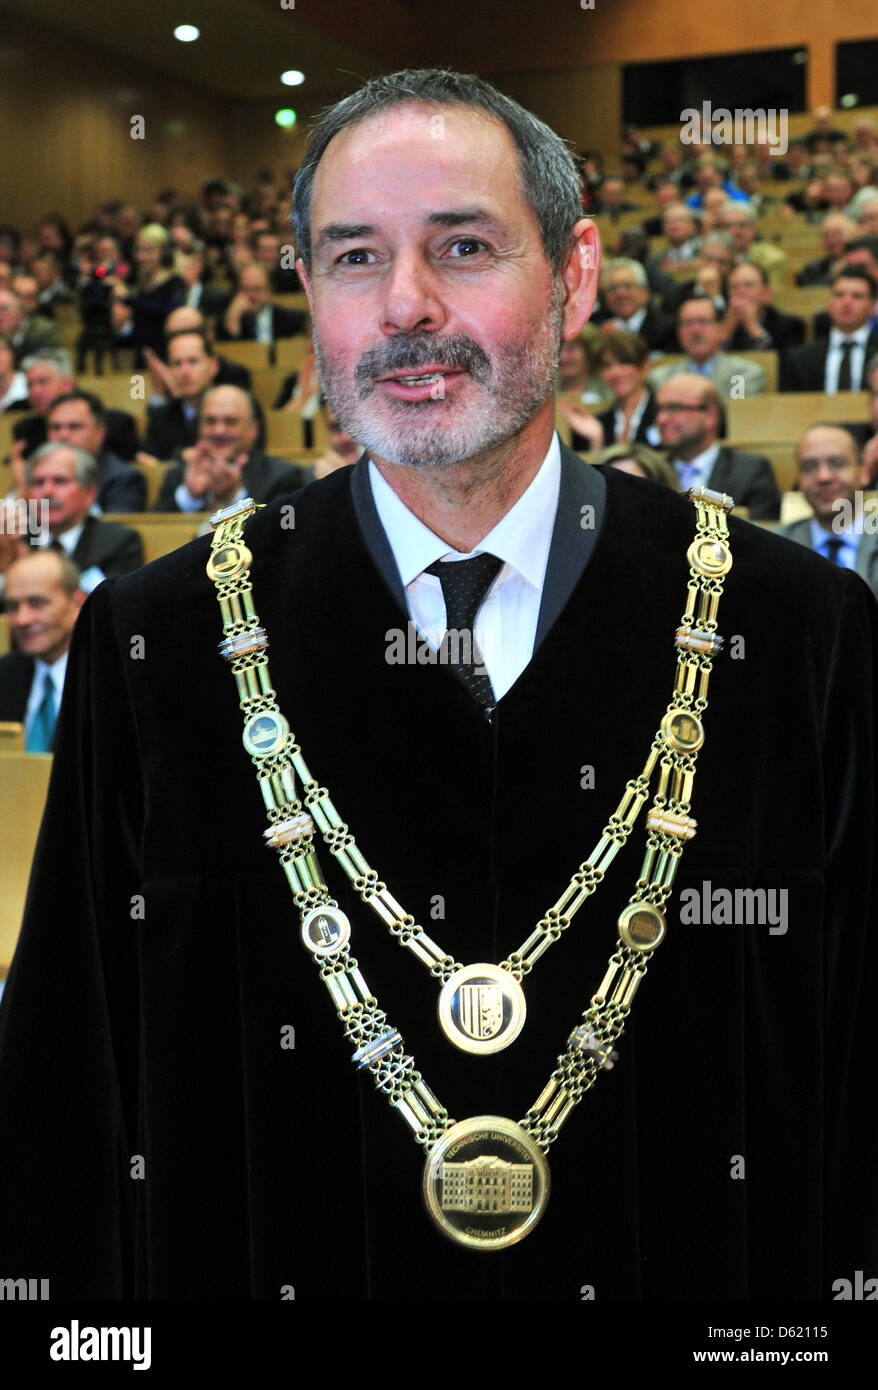 South-African born Arnold van Zyl wears traditional chains during his inauguration ceremony as the new director of the Technical University in Chemnitz, Germany, 7 May 2012. The engineering scientist is the 30th director in the 176 year-long history of the TU Chemnitz. He has been in office since the beginning of April and was elected for a period of five years. Photo: Hendrik Schm Stock Photo